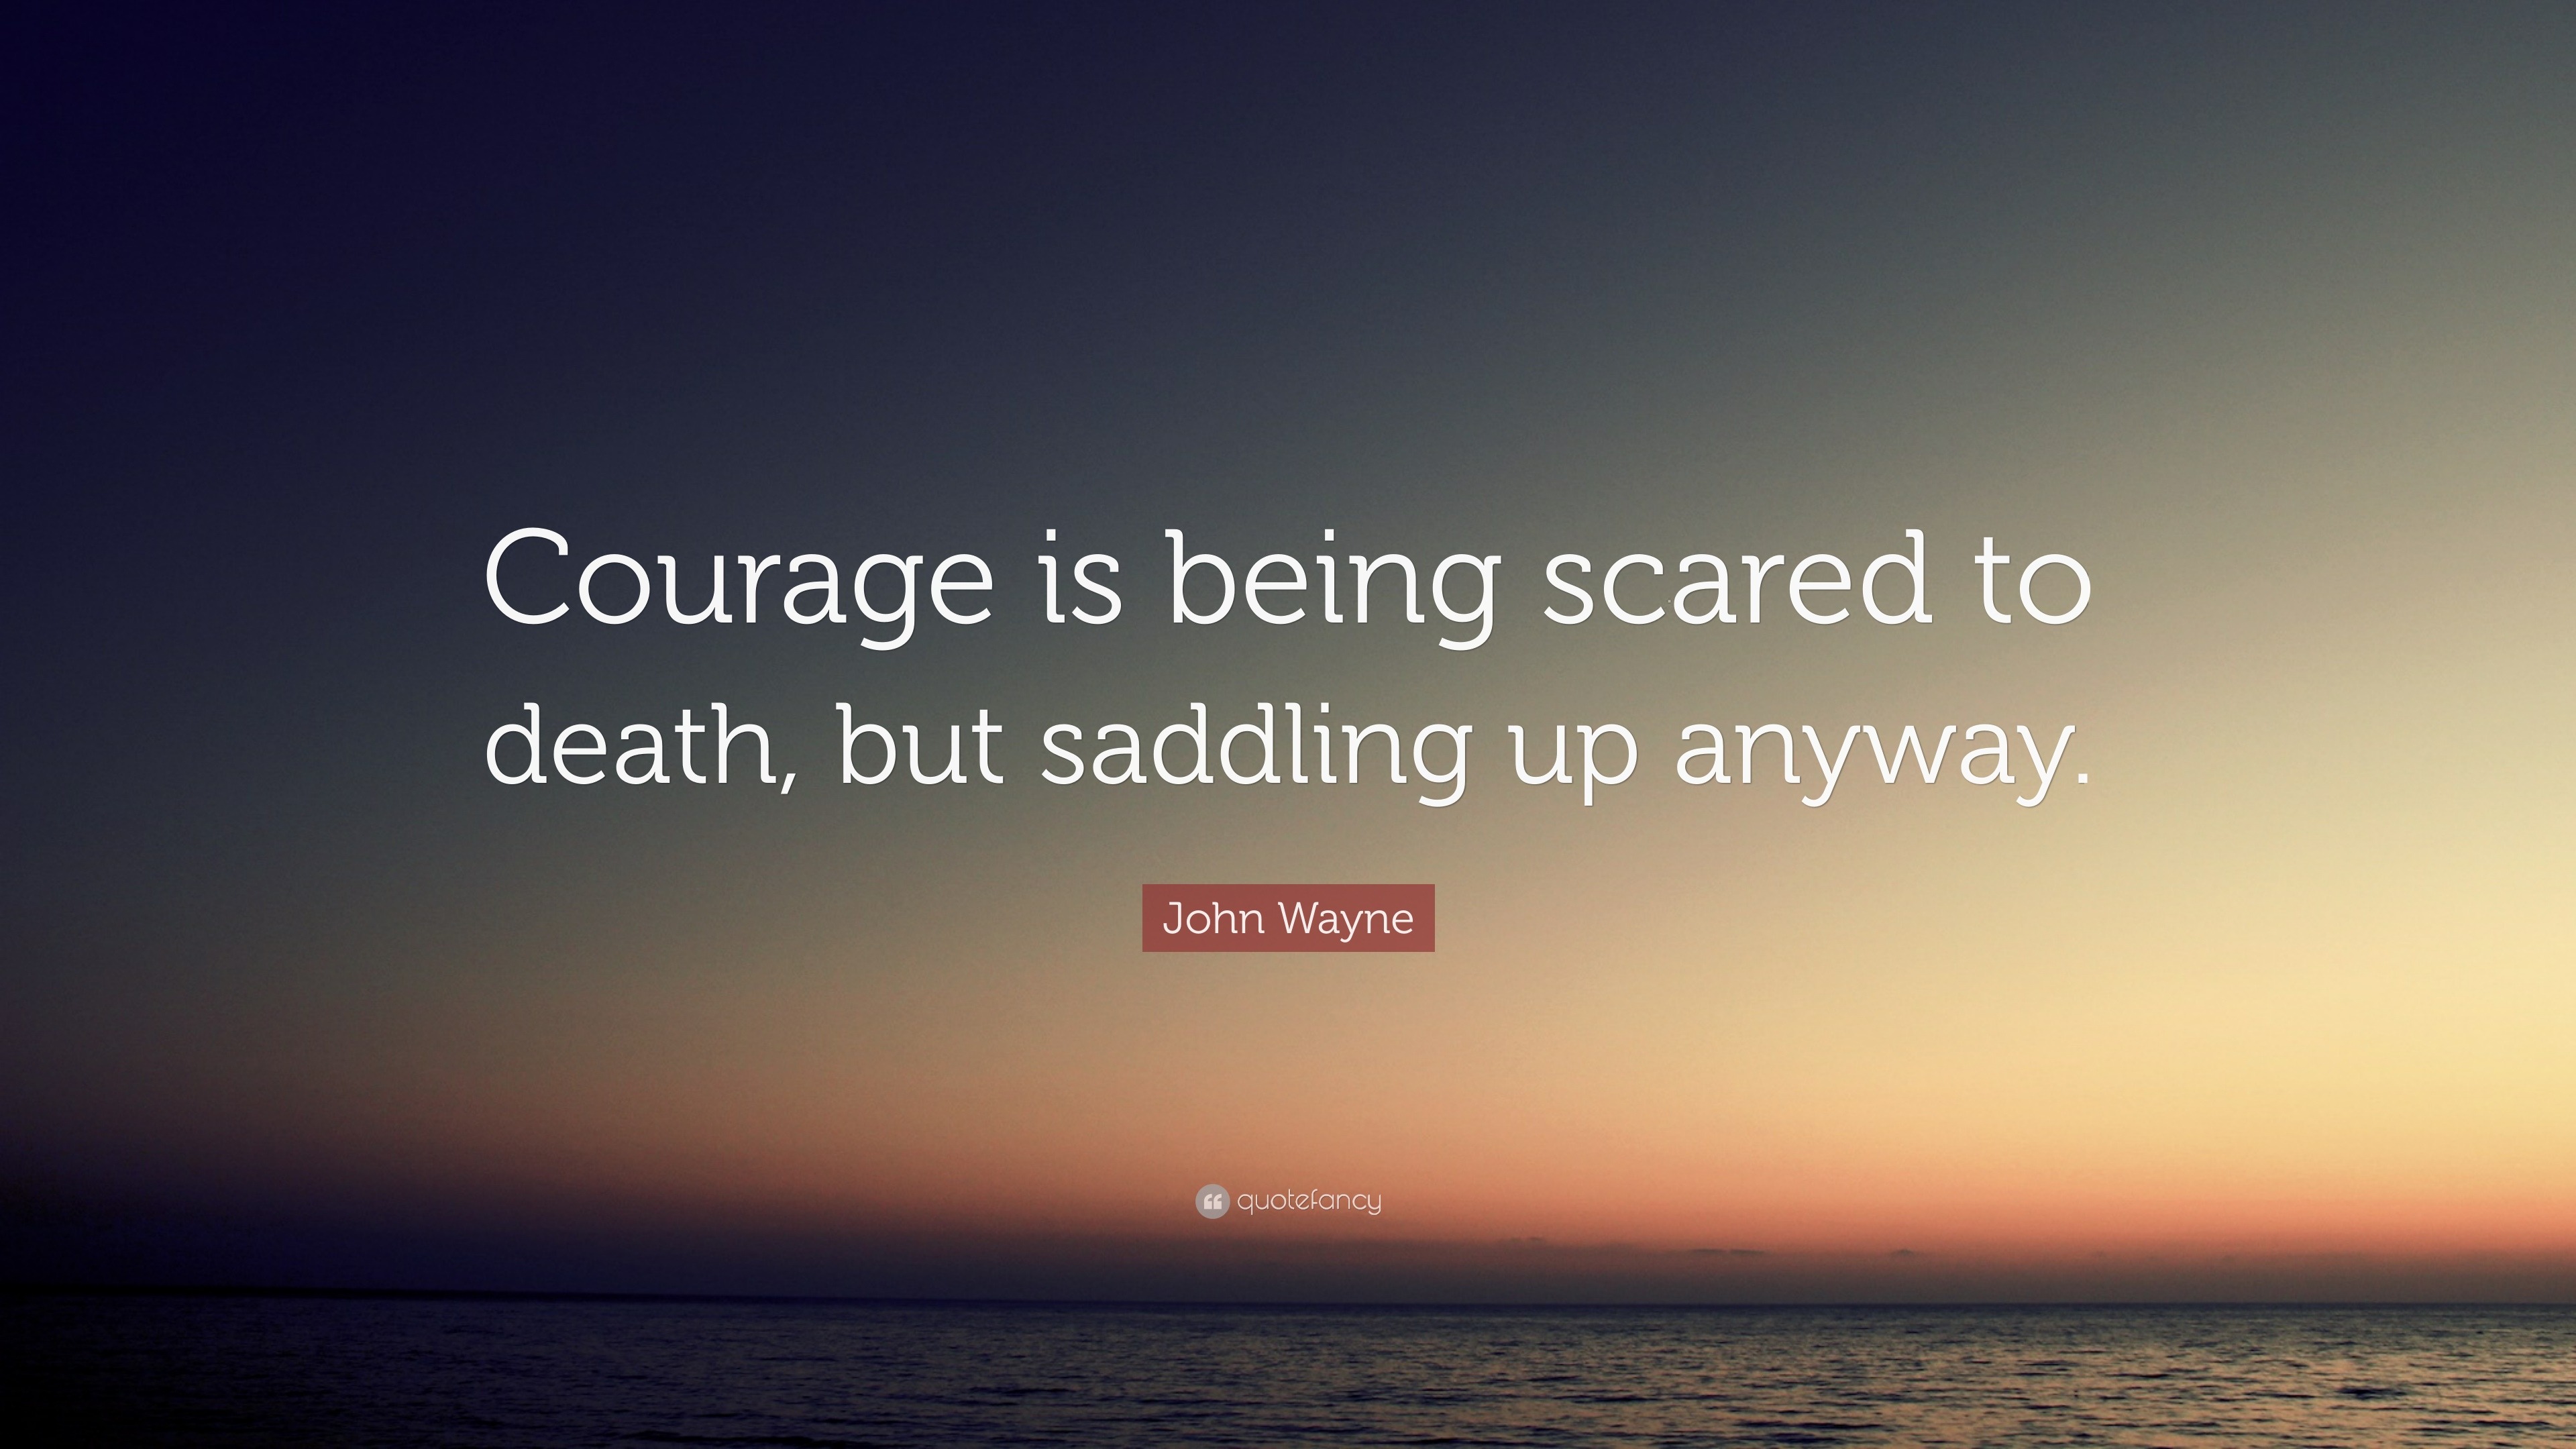 John Wayne Quote: “Courage is being scared to death, but saddling